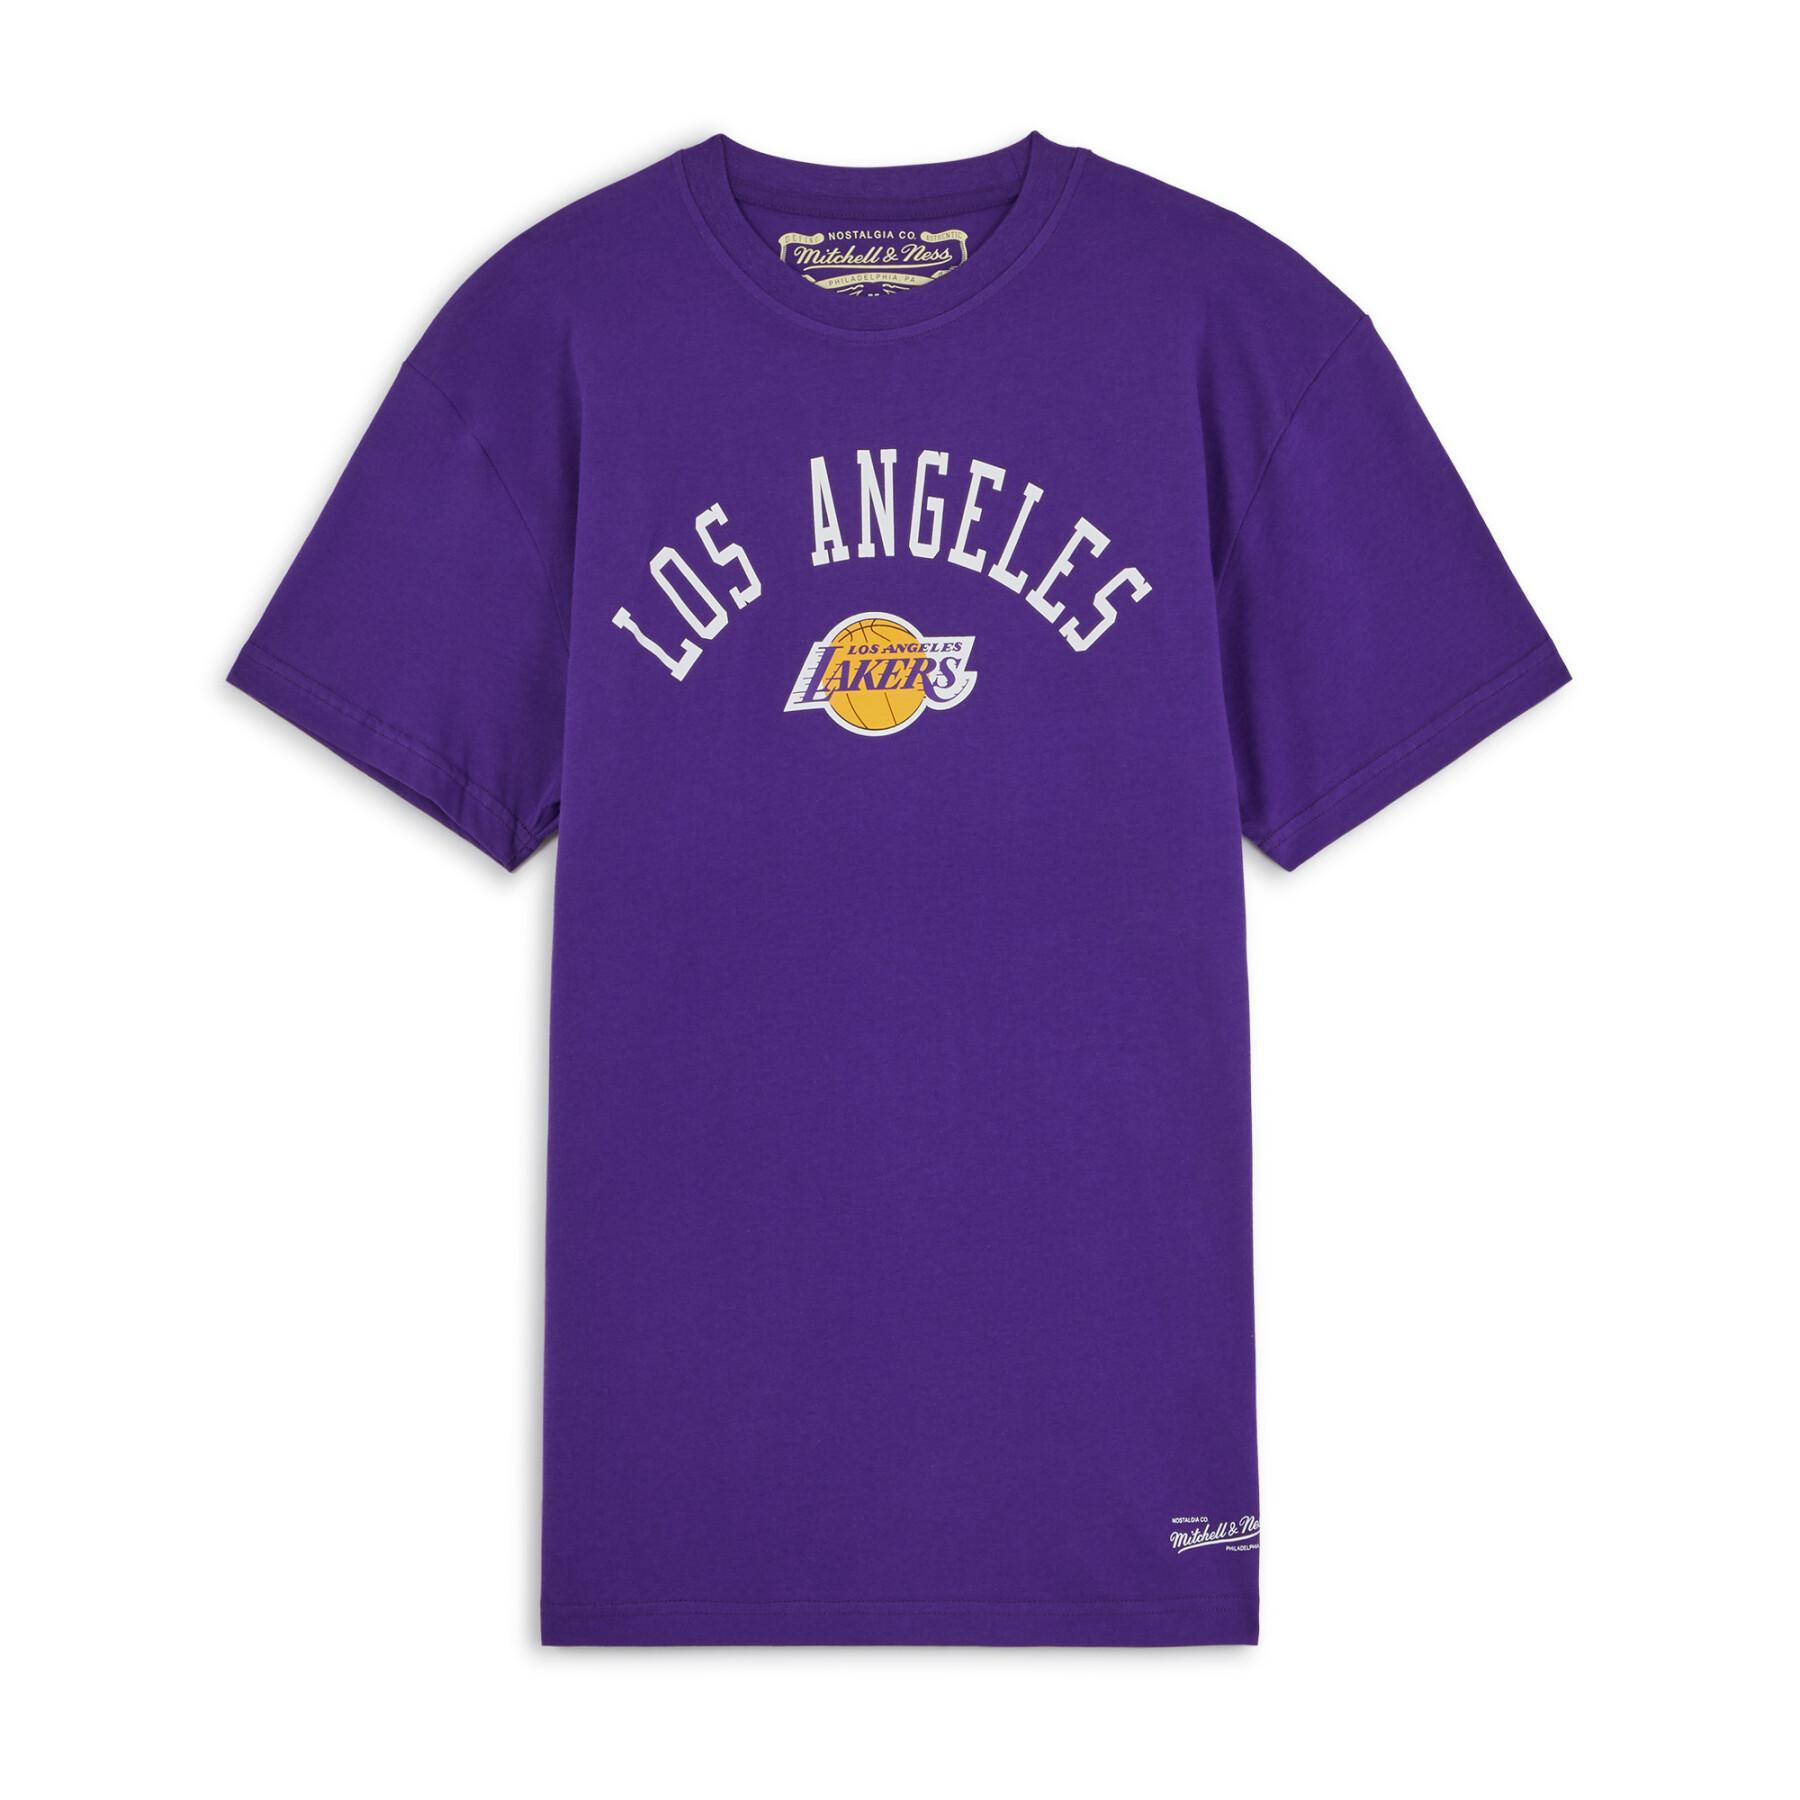 T-Shirt arch Los Angeles Lakers 2021/22